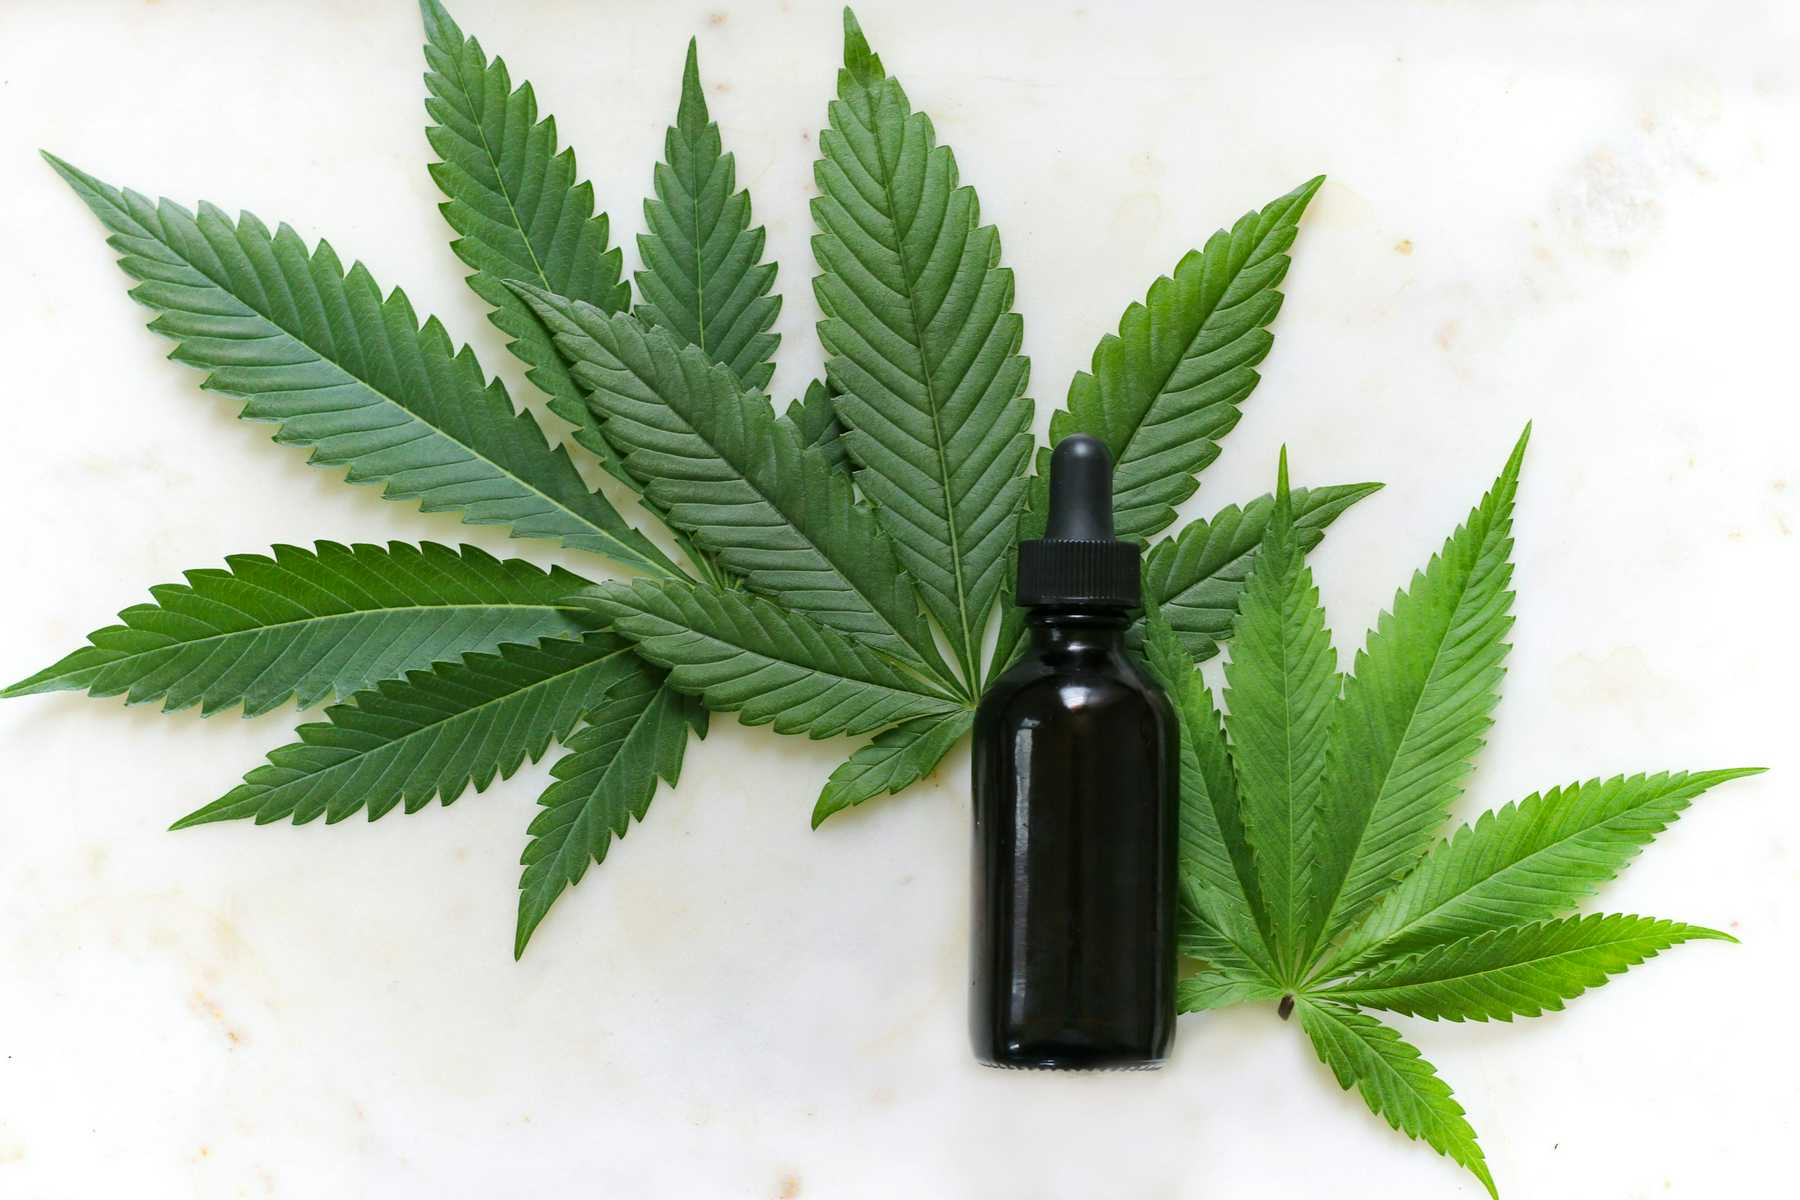 Cannabis leaves with CBD oil dropper bottle.